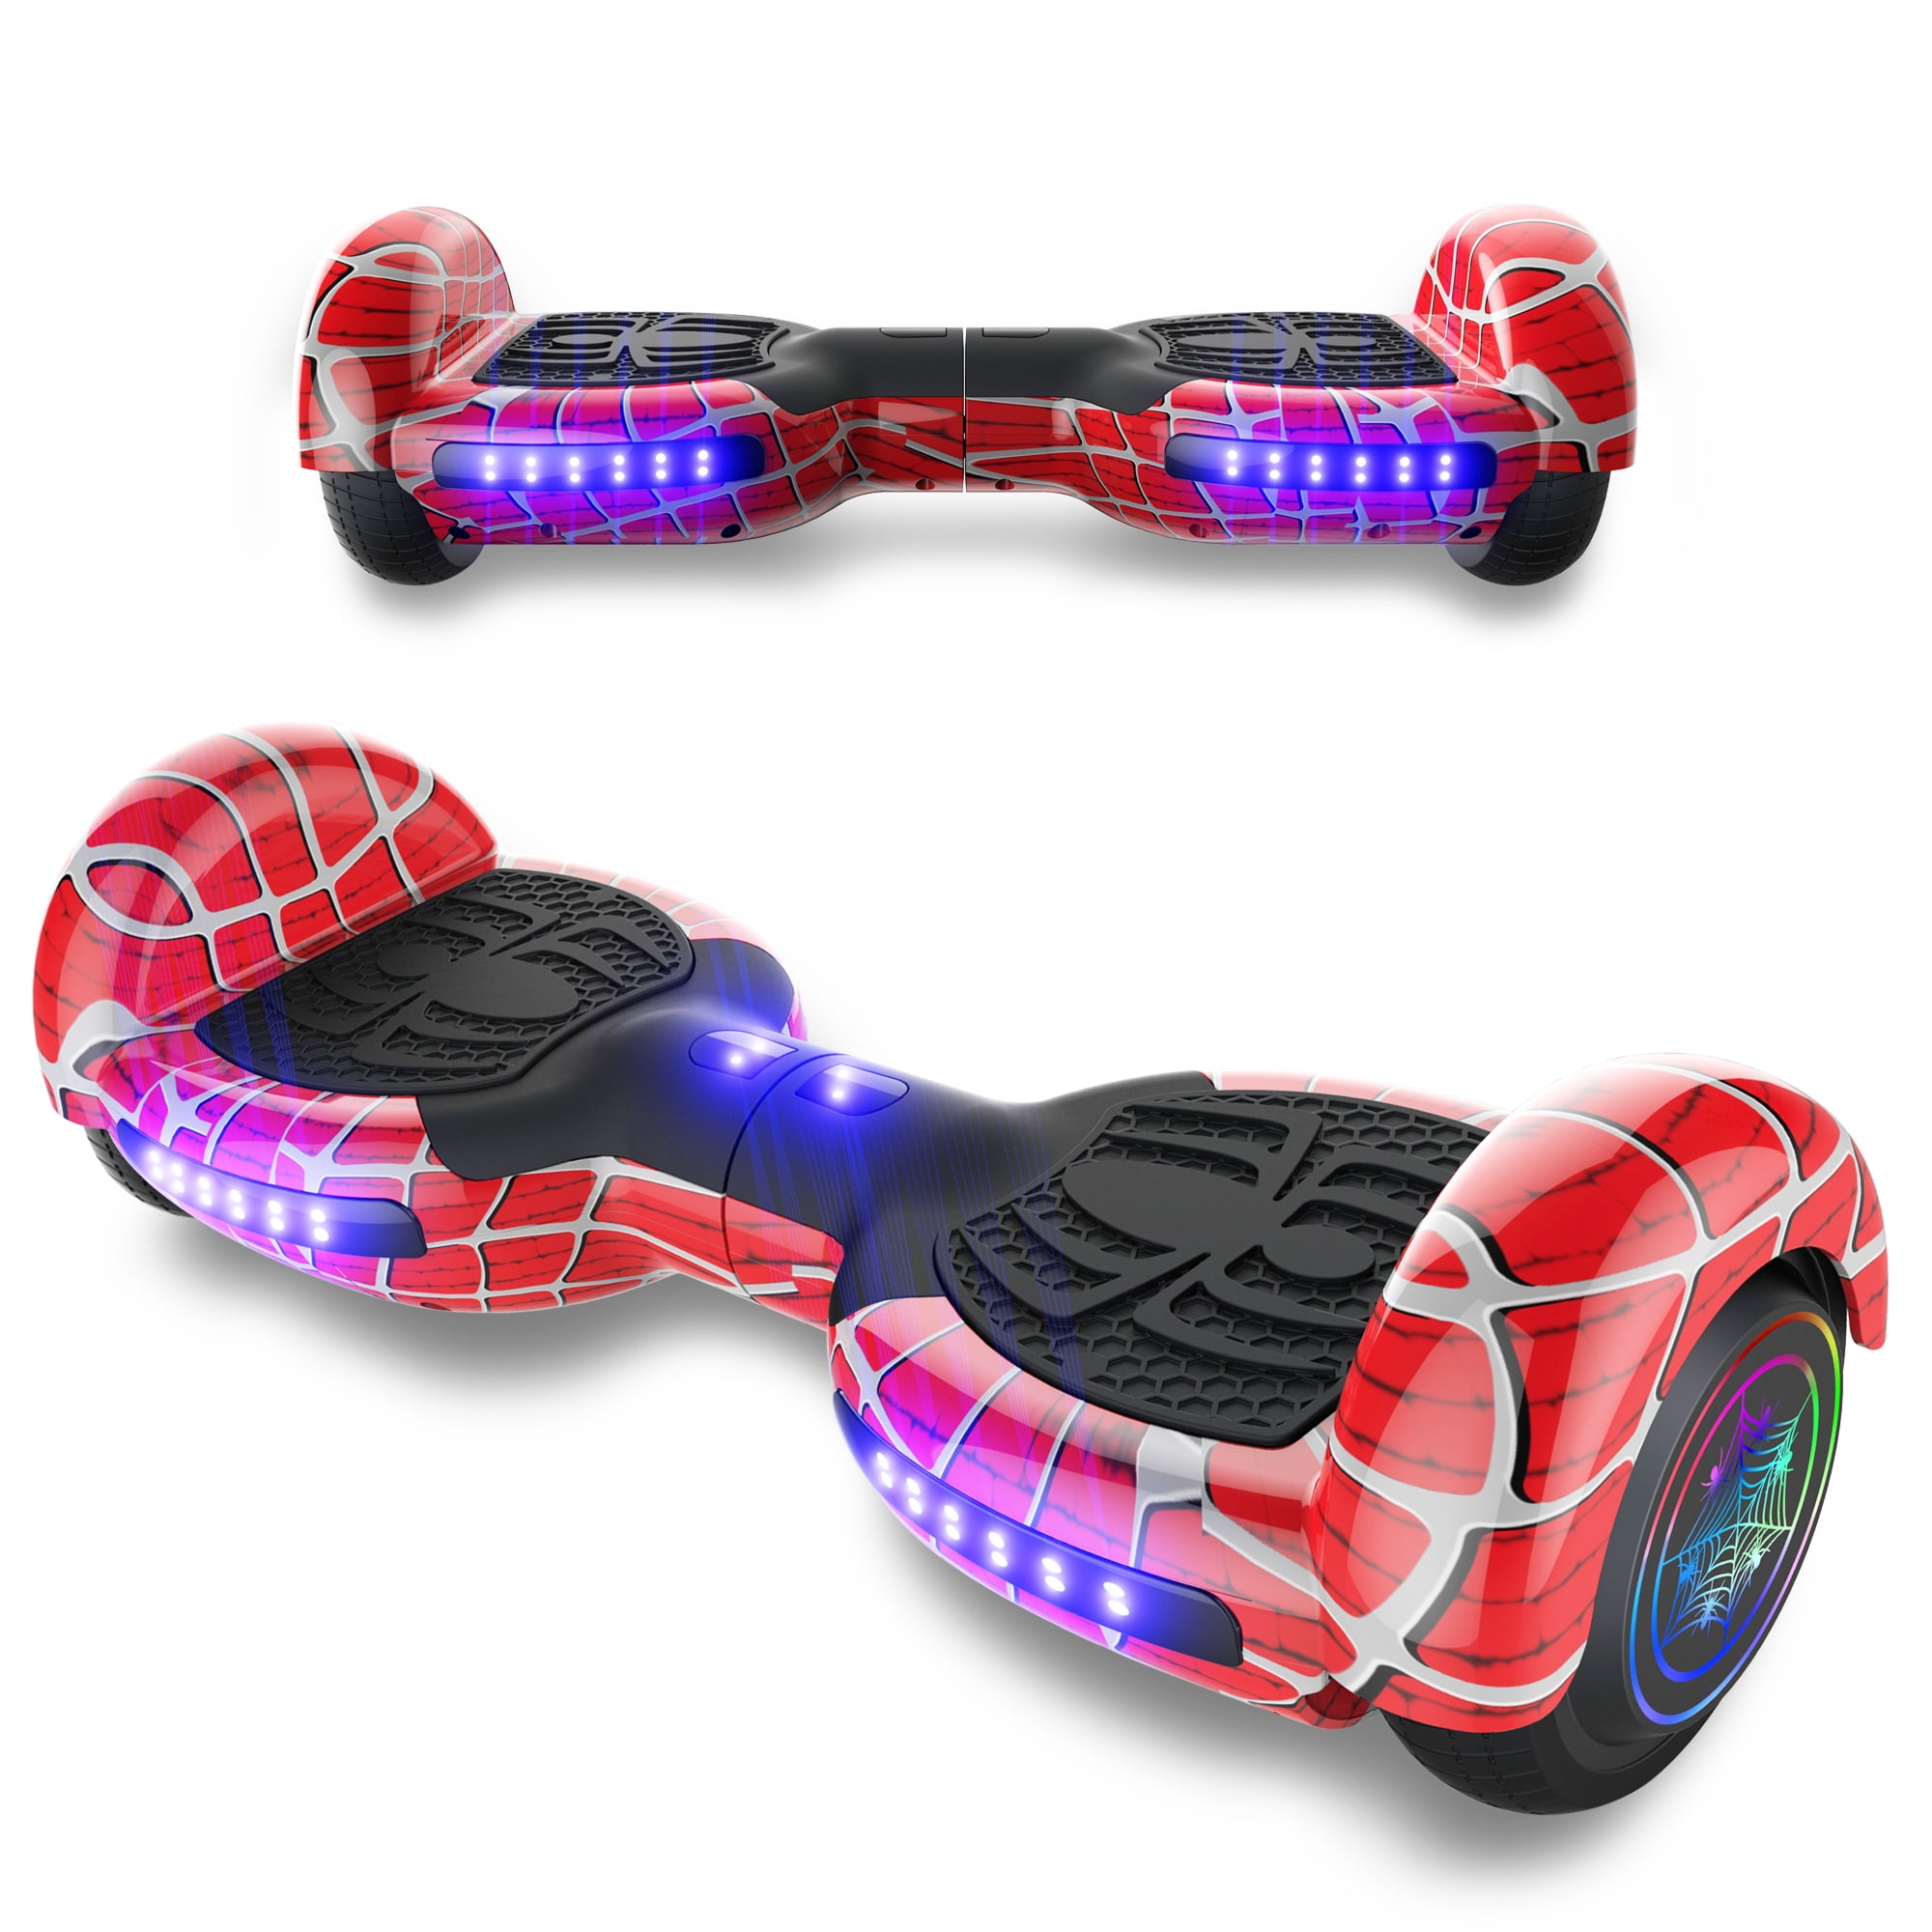 UL Certified TPS Hoverboard Self Balancing Scooter with Speaker LED Lights Flashing Wheels for Kids and Adults Hover Board